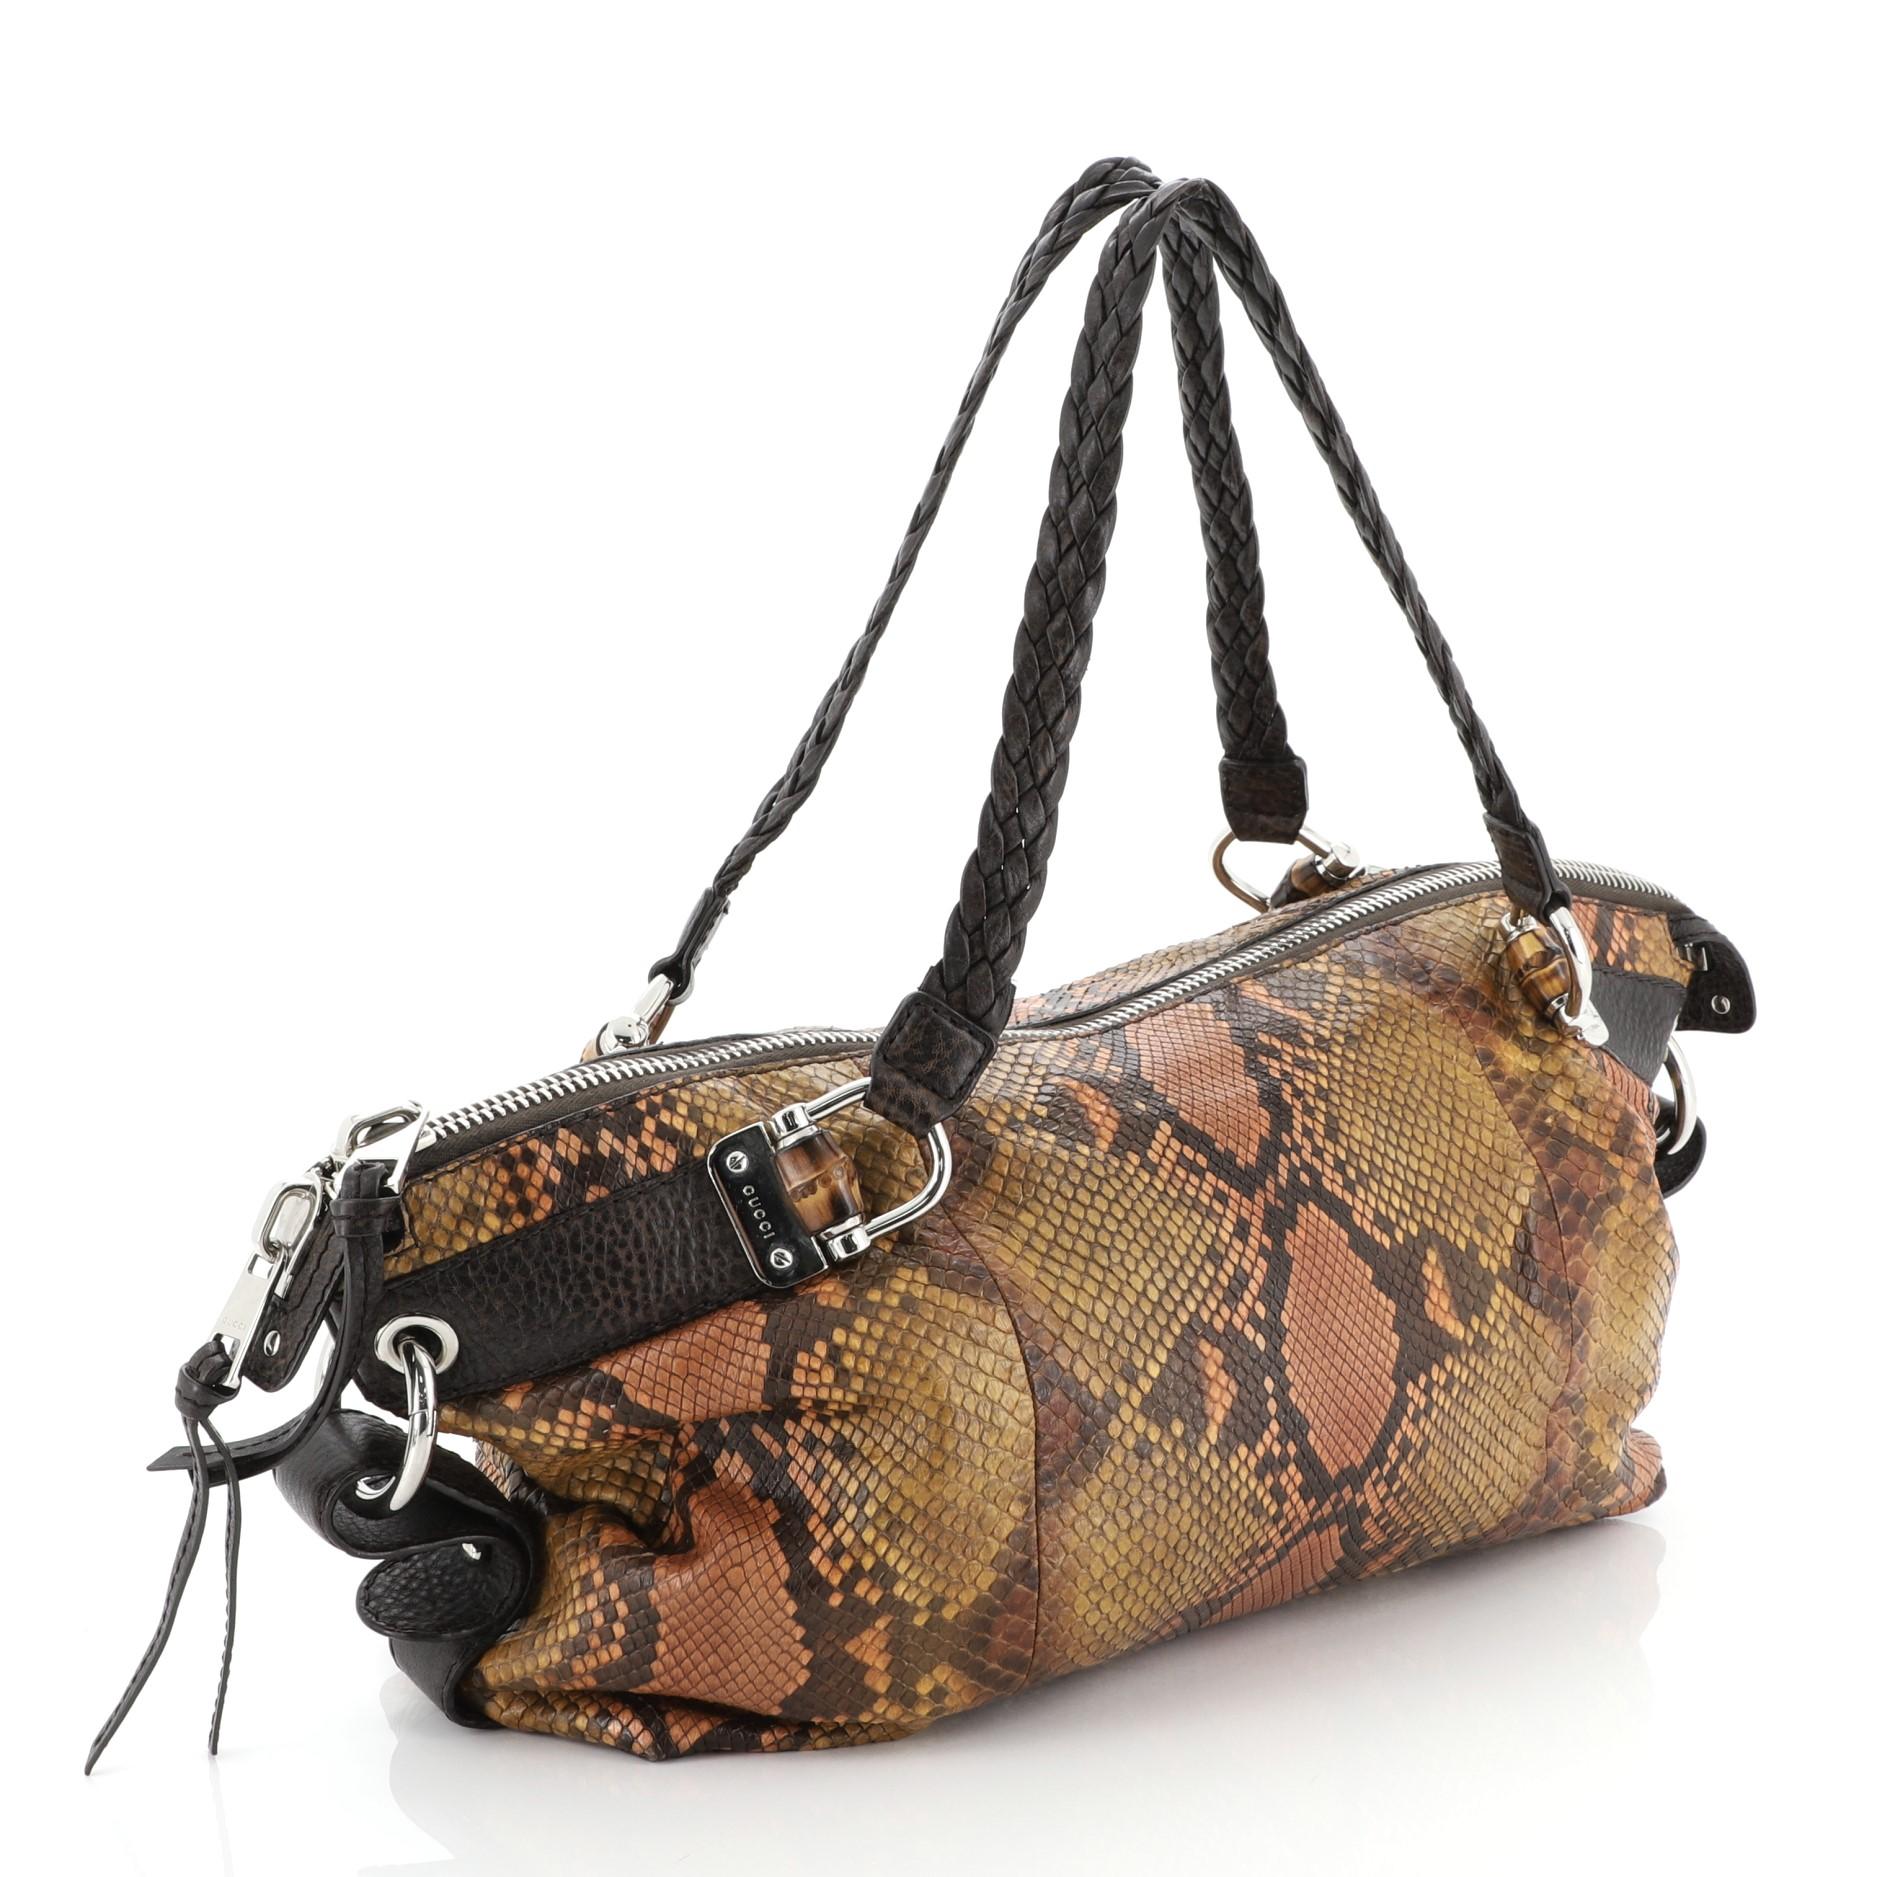 This Gucci Bamboo Bar Shoulder Bag Python Medium, crafted in genuine brown python skin, features dual braided leather handles and silver-tone hardware. Its two-way zip closure opens to a brown leather interior with side zip and slip